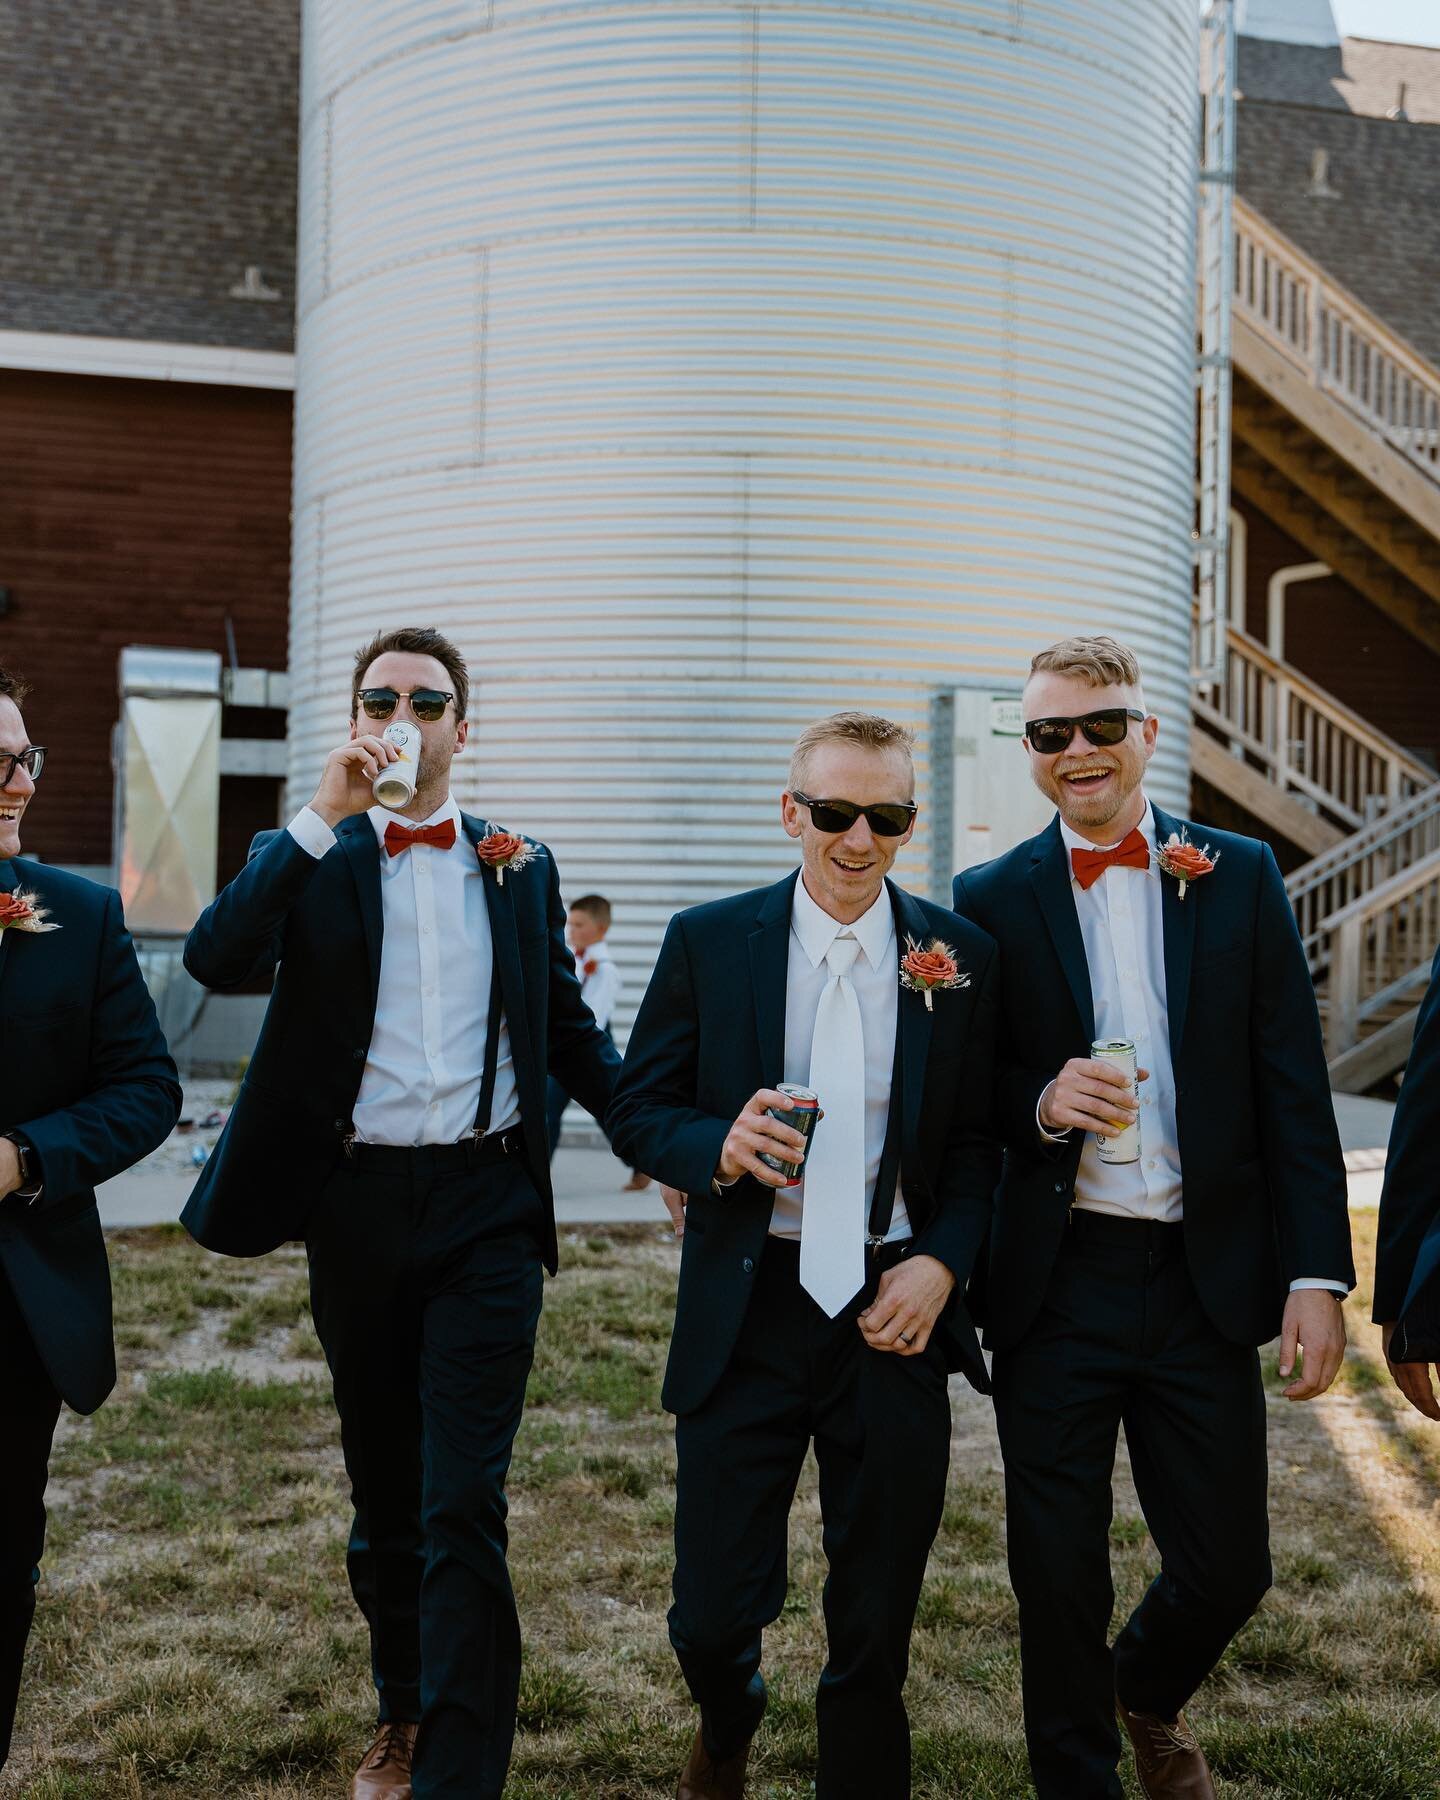 I always love capturing some good shenanigans from the groomsmen. As soon as they&rsquo;re all dressed up and get a little liquid courage in their systems, you can tell they&rsquo;re feeling themselves  Here are some of my favorites. 
&bull;
&bull;